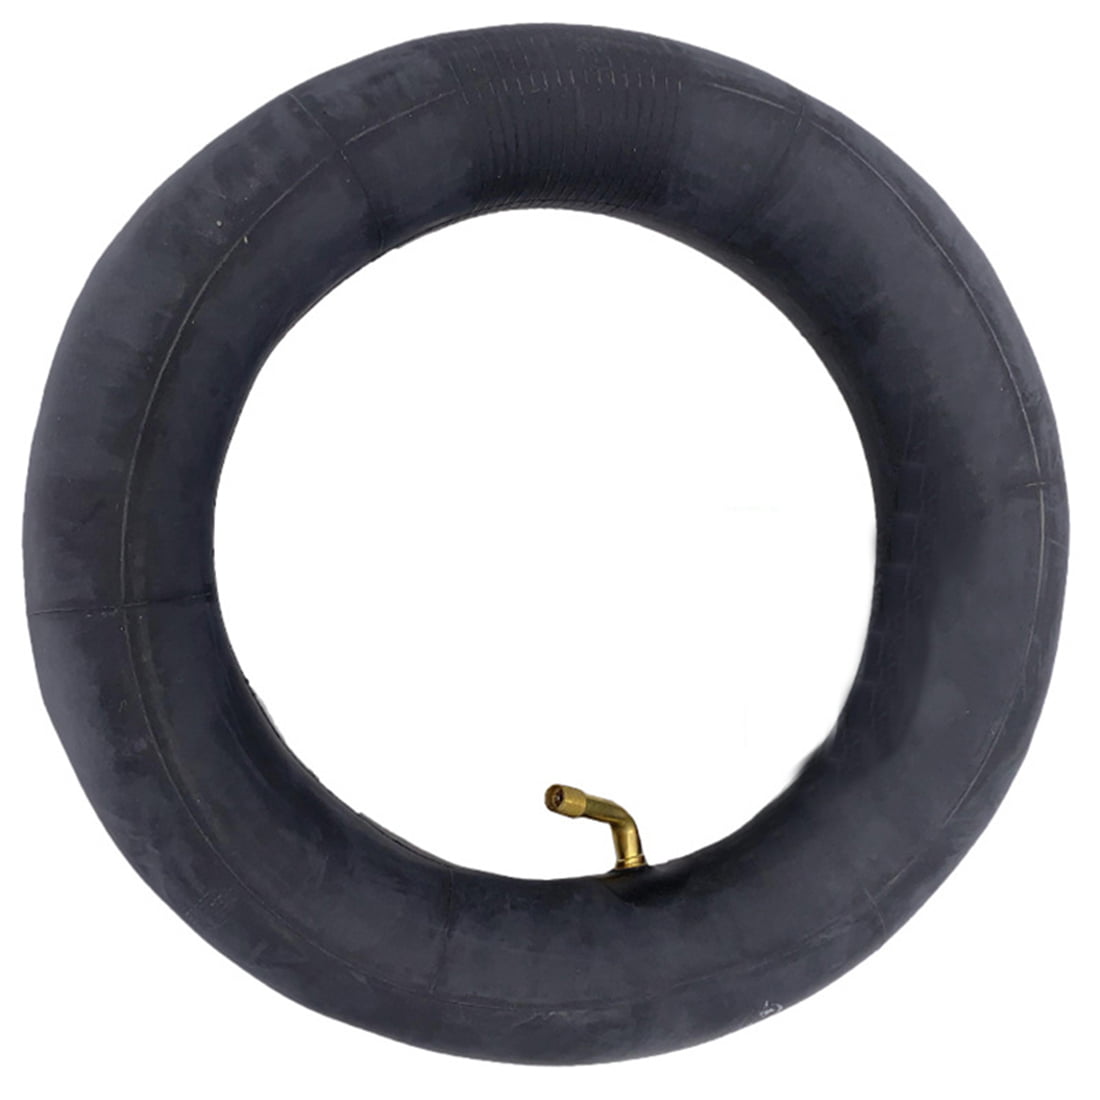 bent stem 4.00-5 Inner Tube for Mobility Scooter and Power Chairs FREE ship 